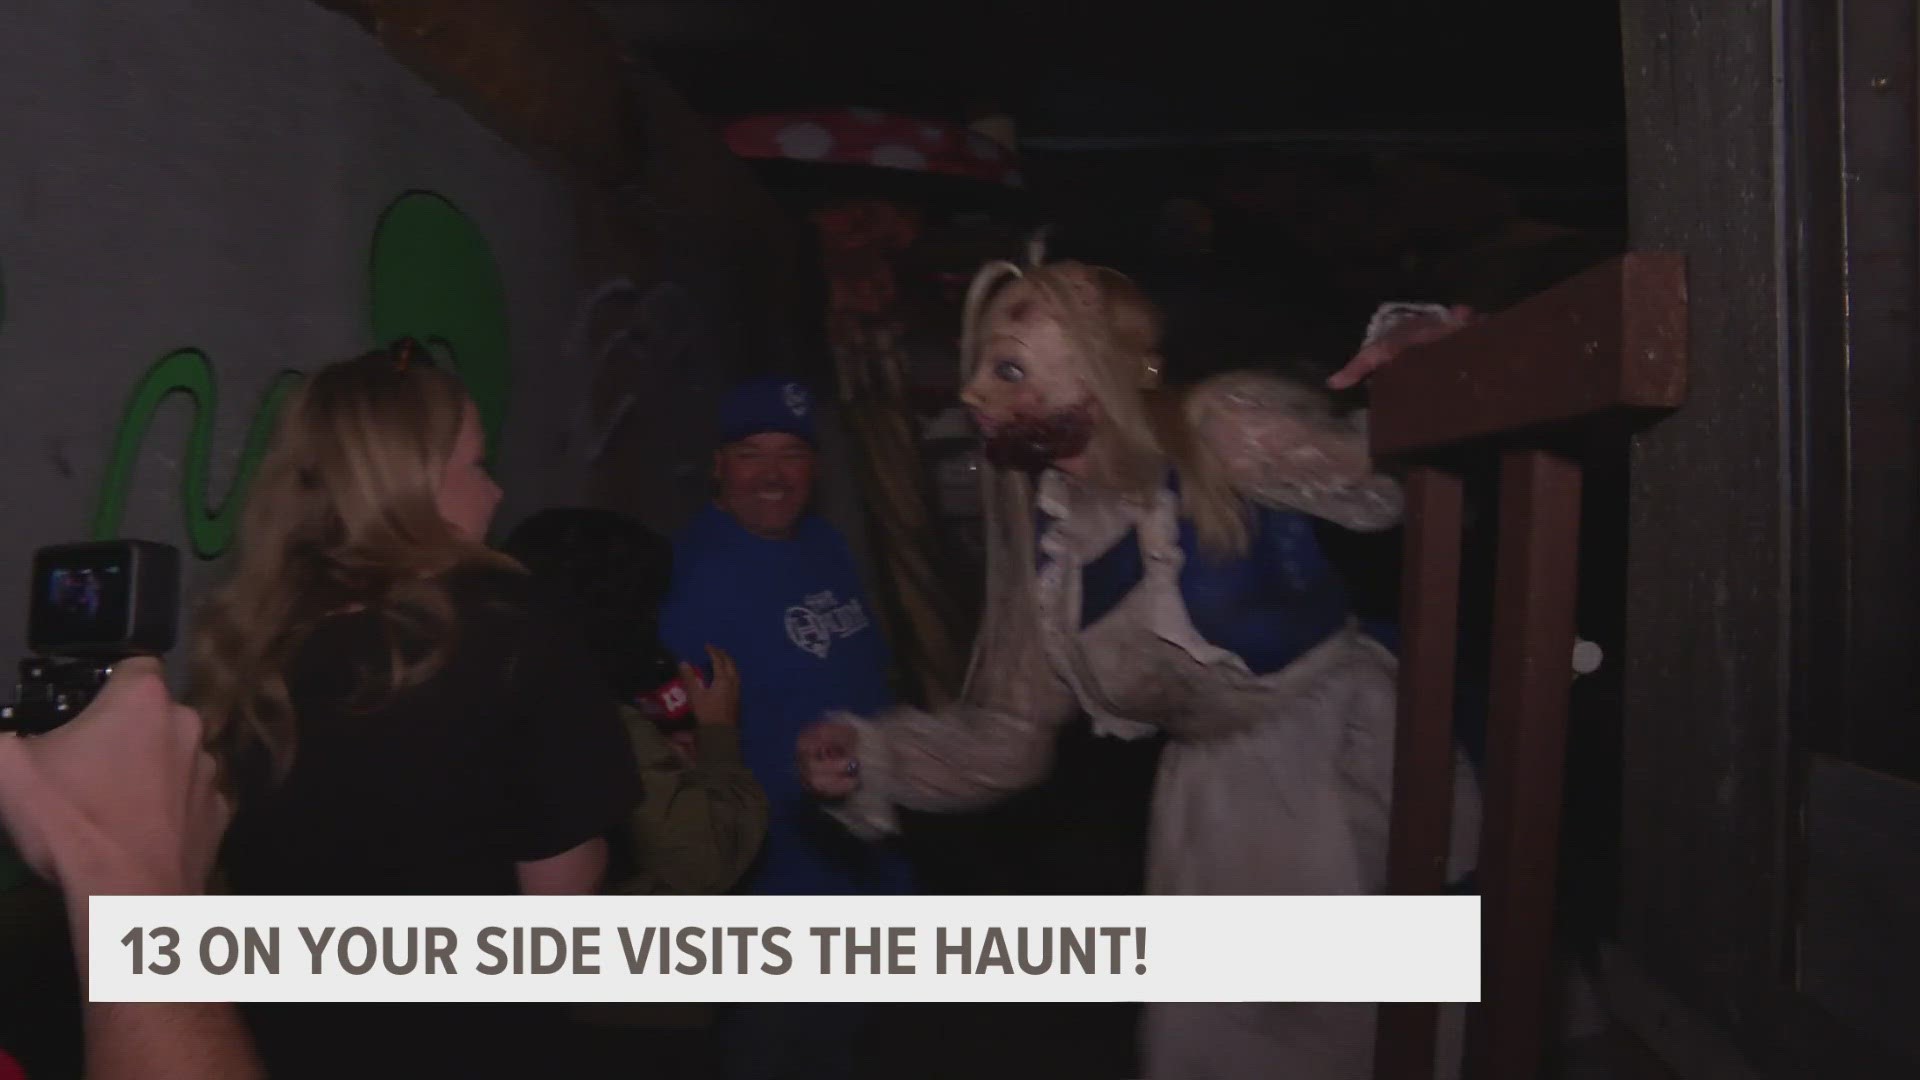 The Haunt has been in business for more than 20 years and it added a brand new spooky story for guests.